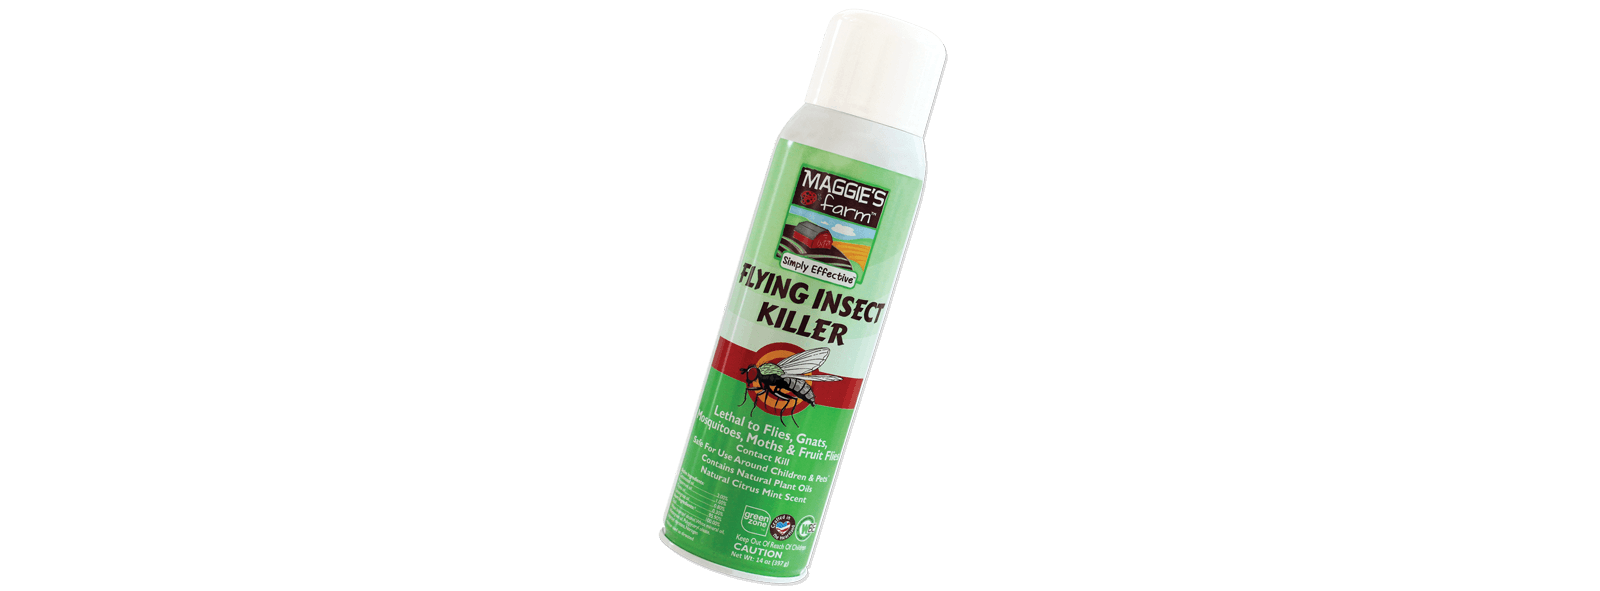 Maggie's Farm Flying Insect Killer